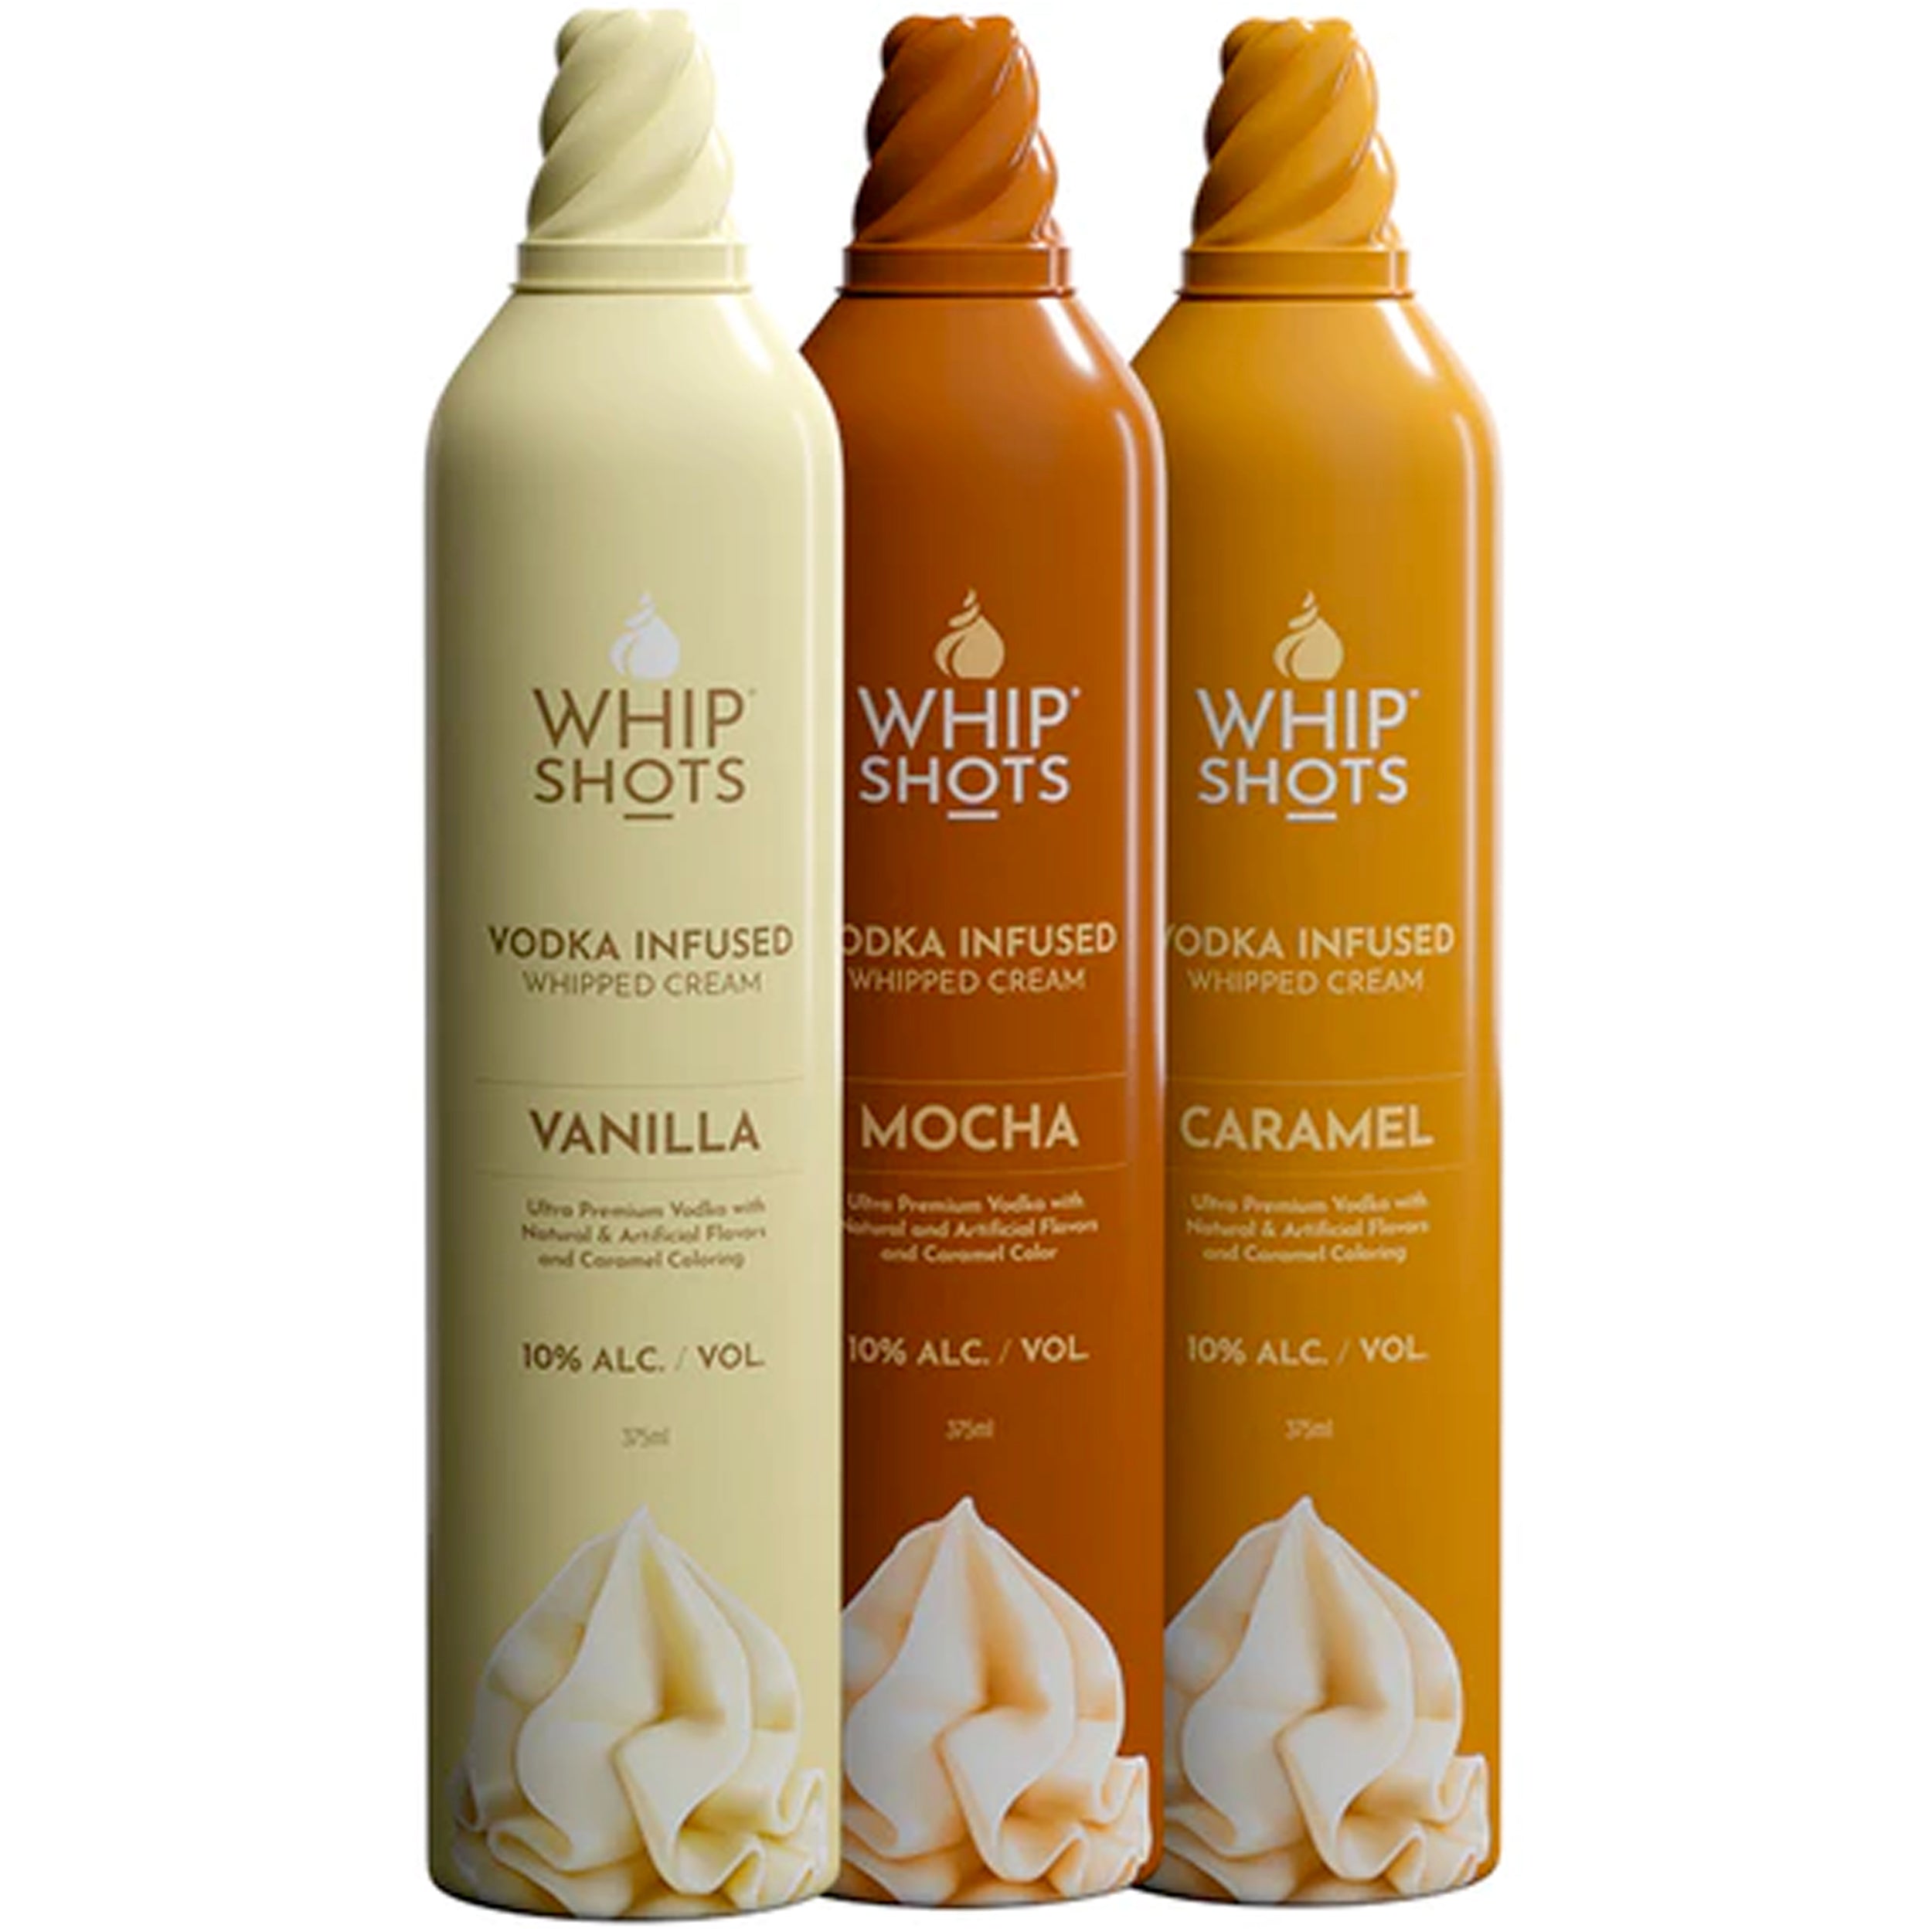 Whip Shots Vodka Infused Whipped Cream by Cardi B Bundle 200mL